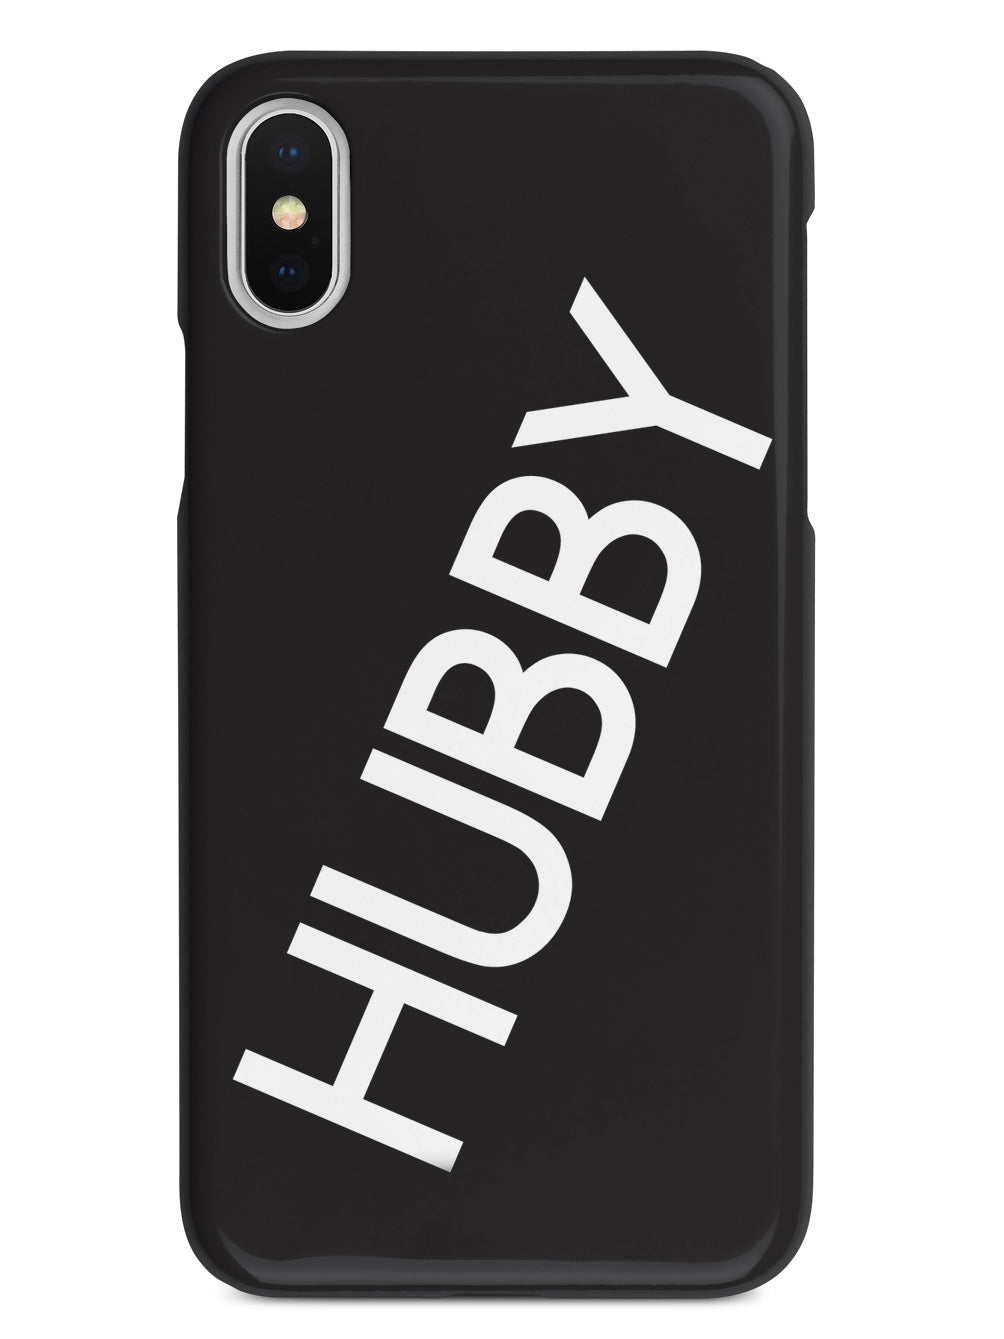 Hubby and Wifey - Hubby Case